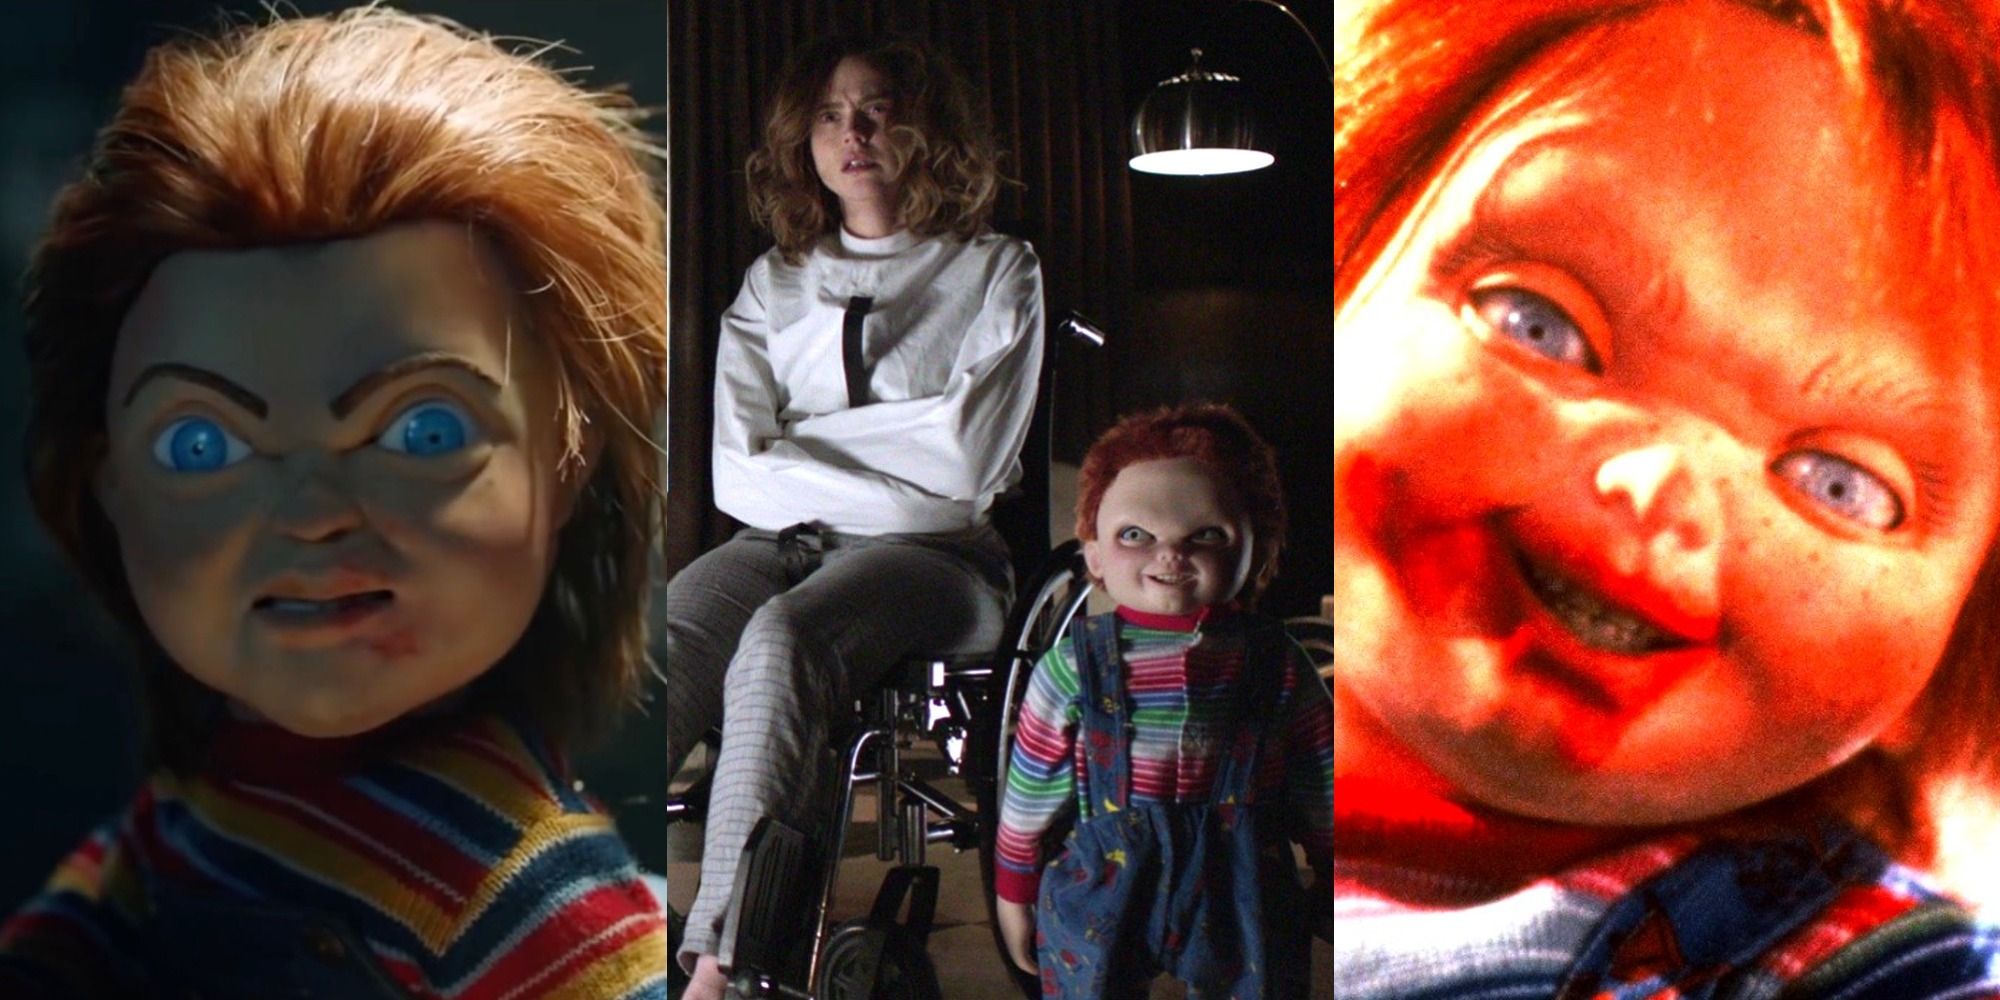 Three images of Chucky side by side